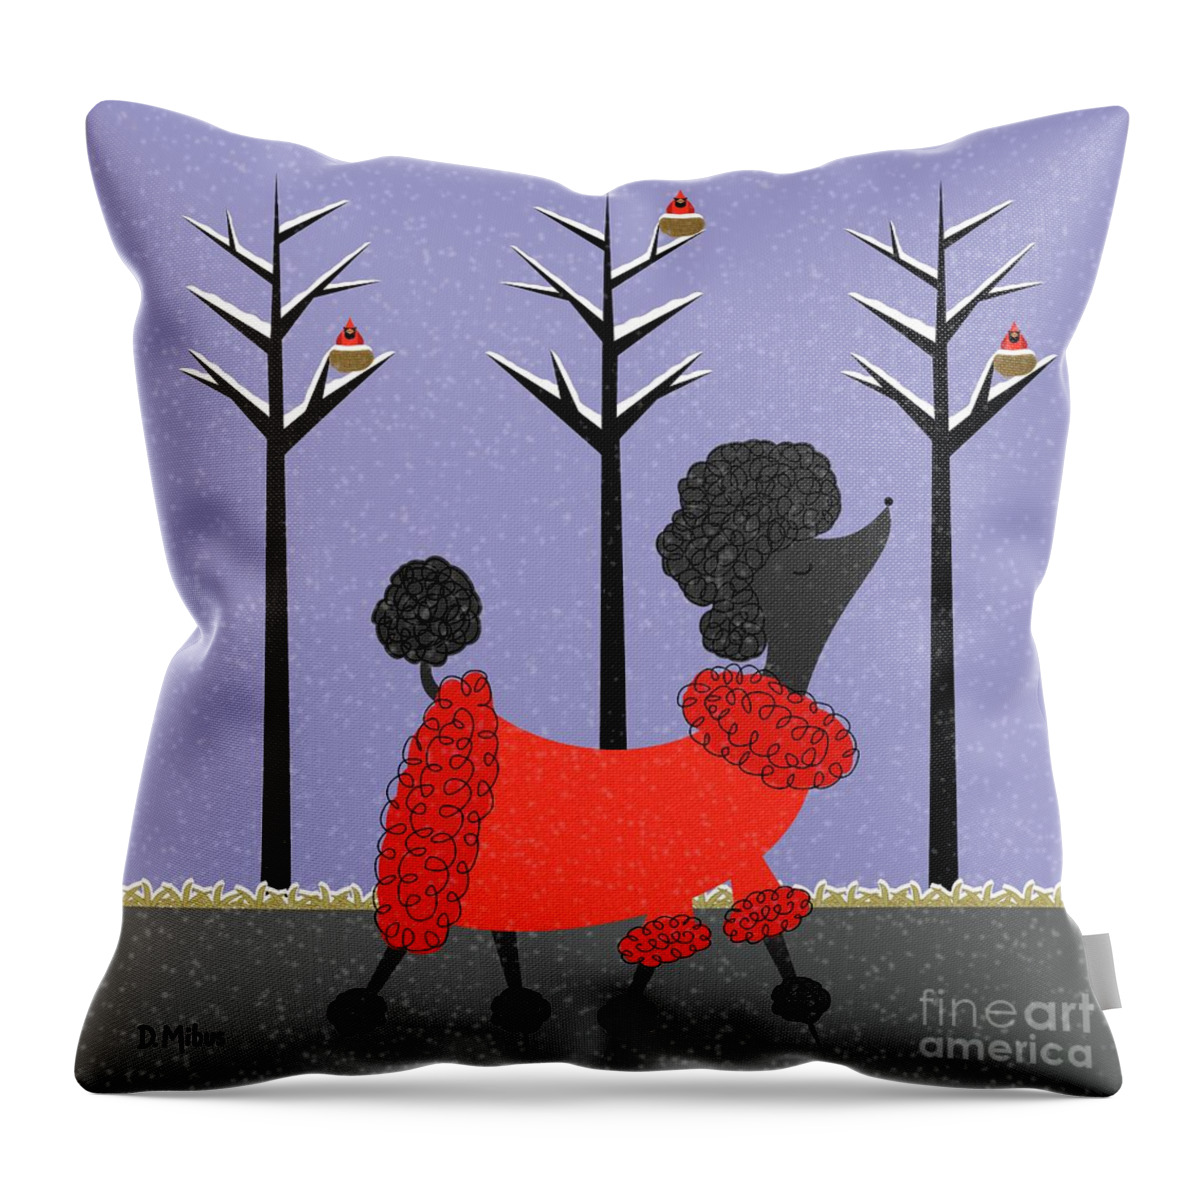 Mid Century Modern Throw Pillow featuring the digital art Mid Century Modern Black Poodle Winter by Donna Mibus